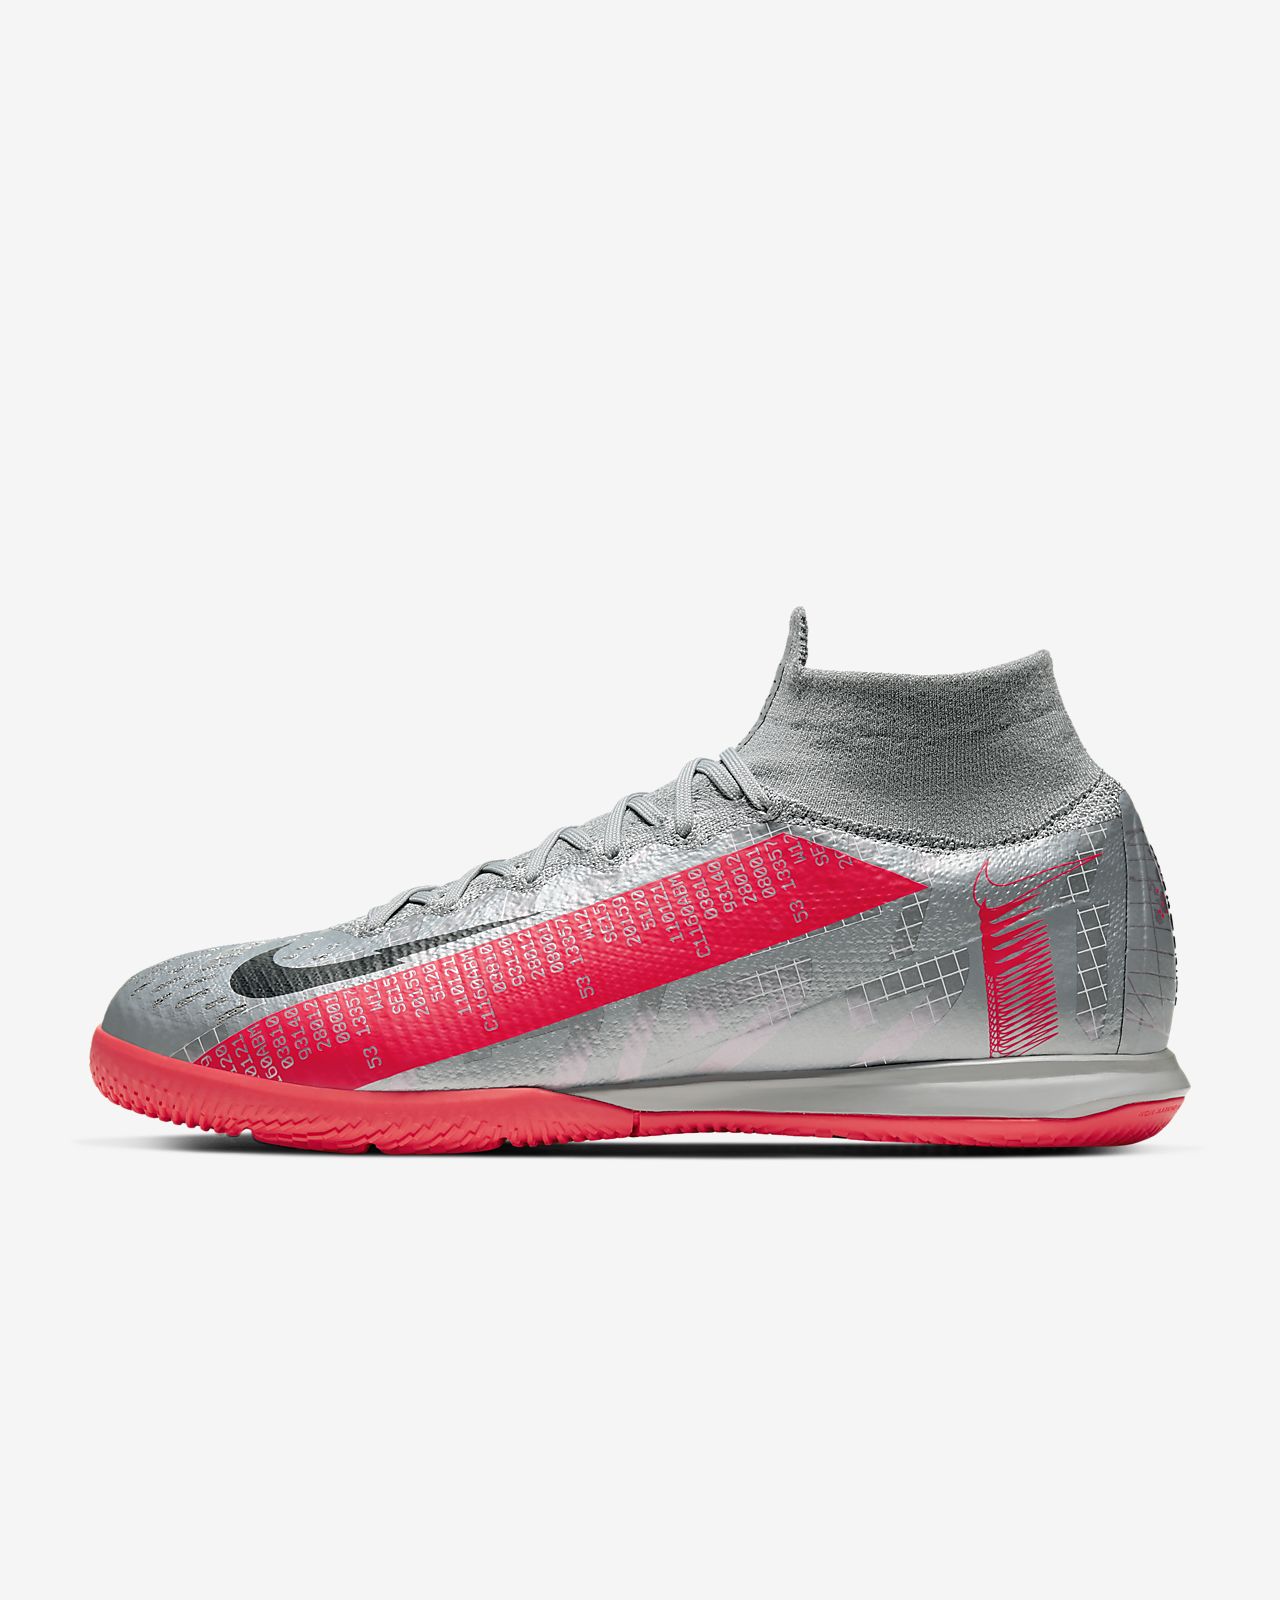 Nike Mercurial Superfly 7 Academy TF Soccer Shoe Laser.